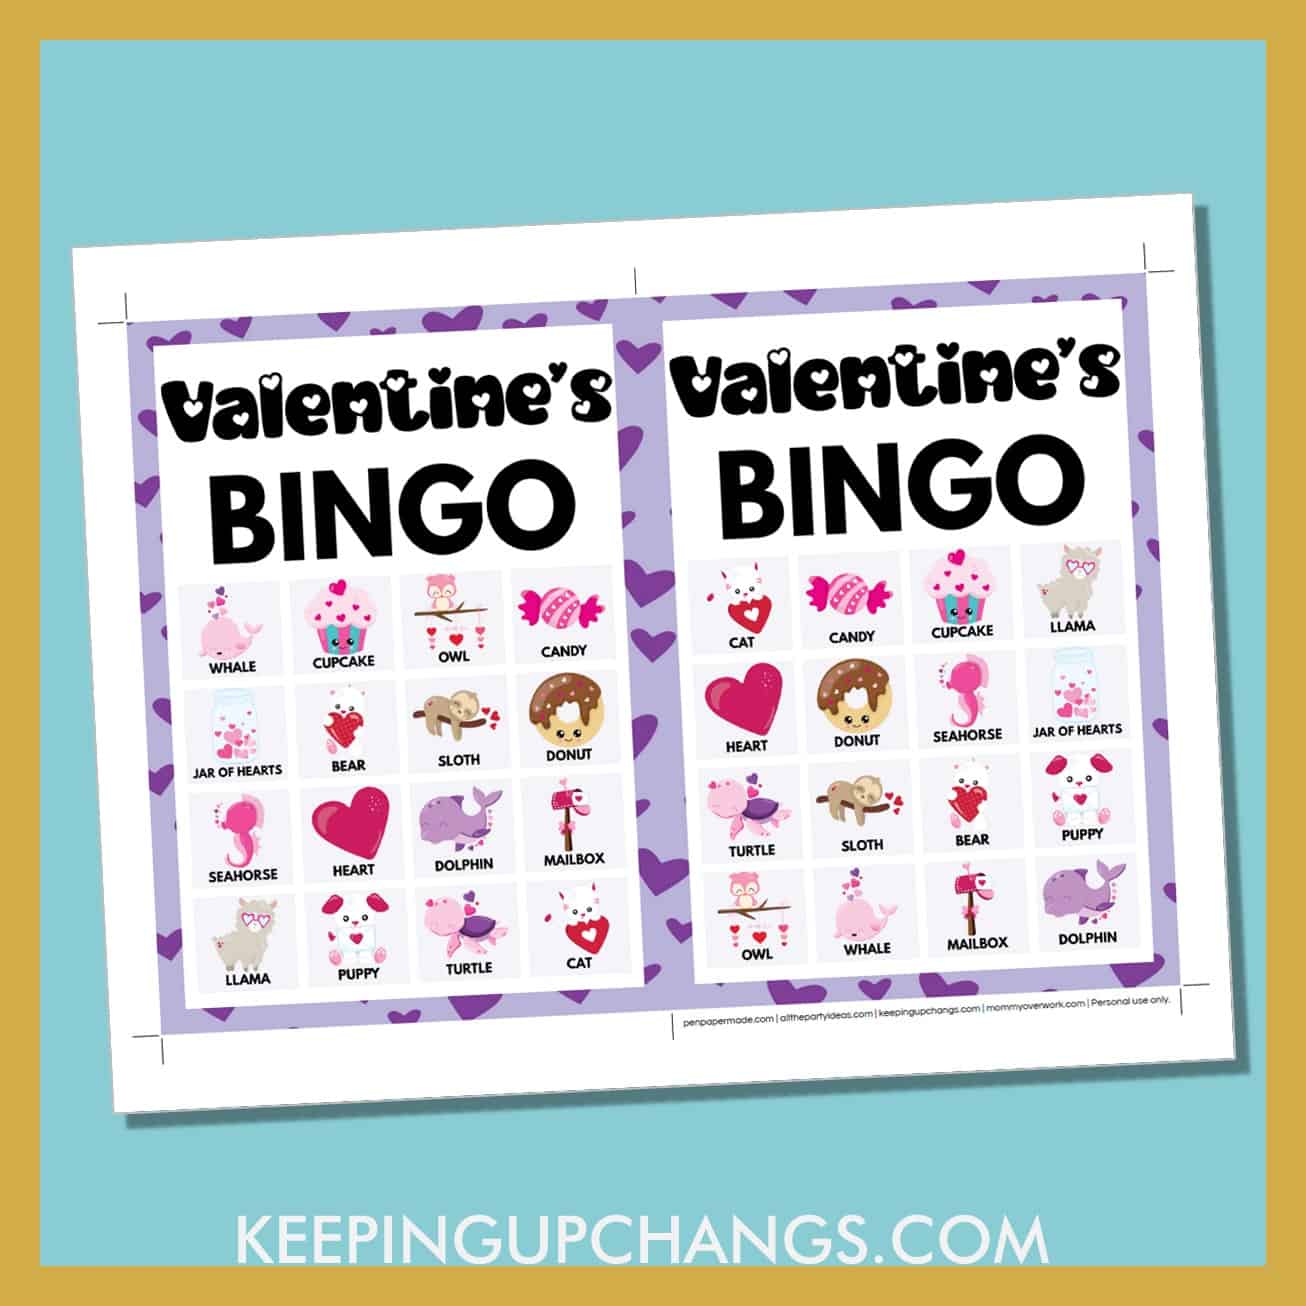 free valentine's bingo card 4x4 5x7 game boards with images and text words.